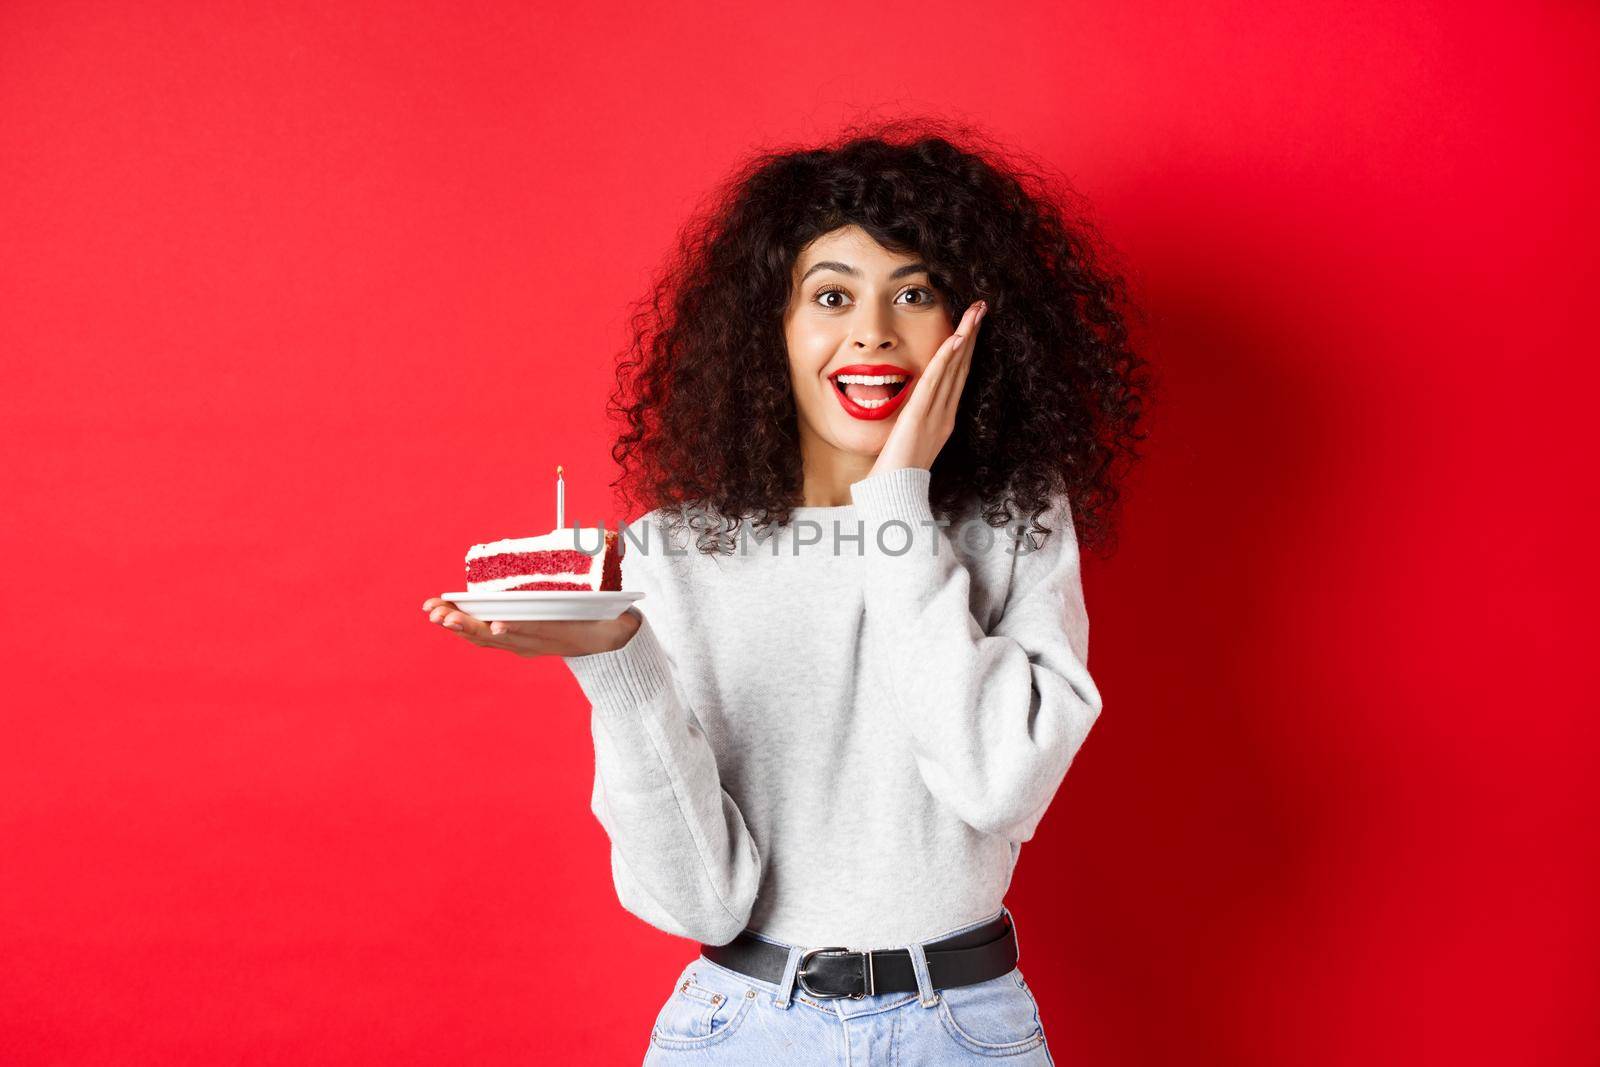 Excited woman celebrating birthday, holding cake and looking surprised and happy at camera, red background.